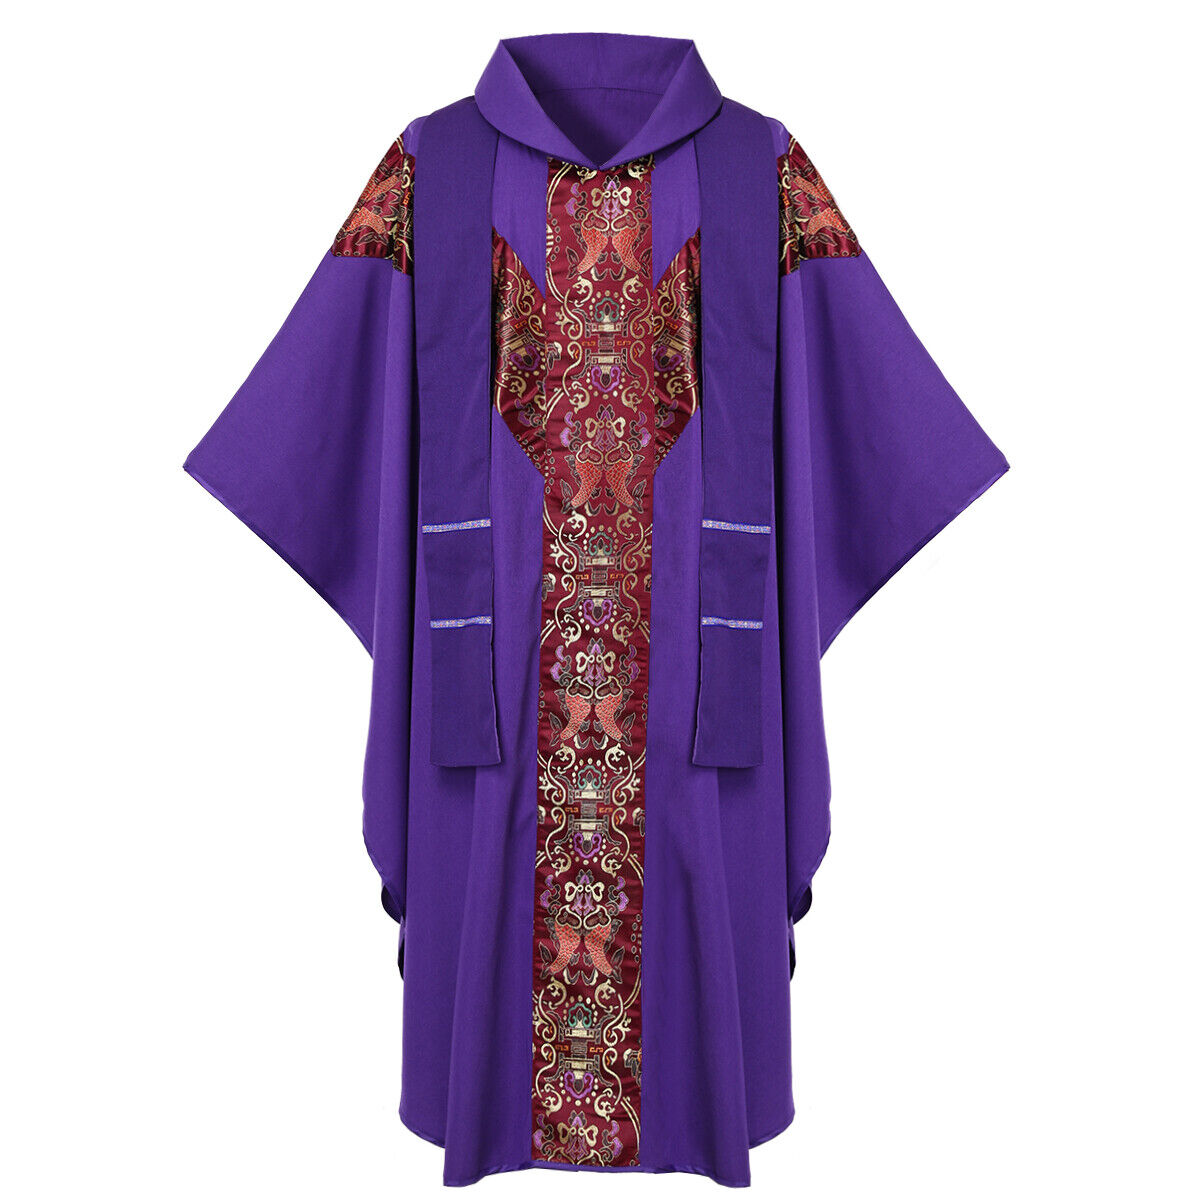 Christian Priest Purple Chasuble Clergy Pastor Liturgical Mass Robe With Stole